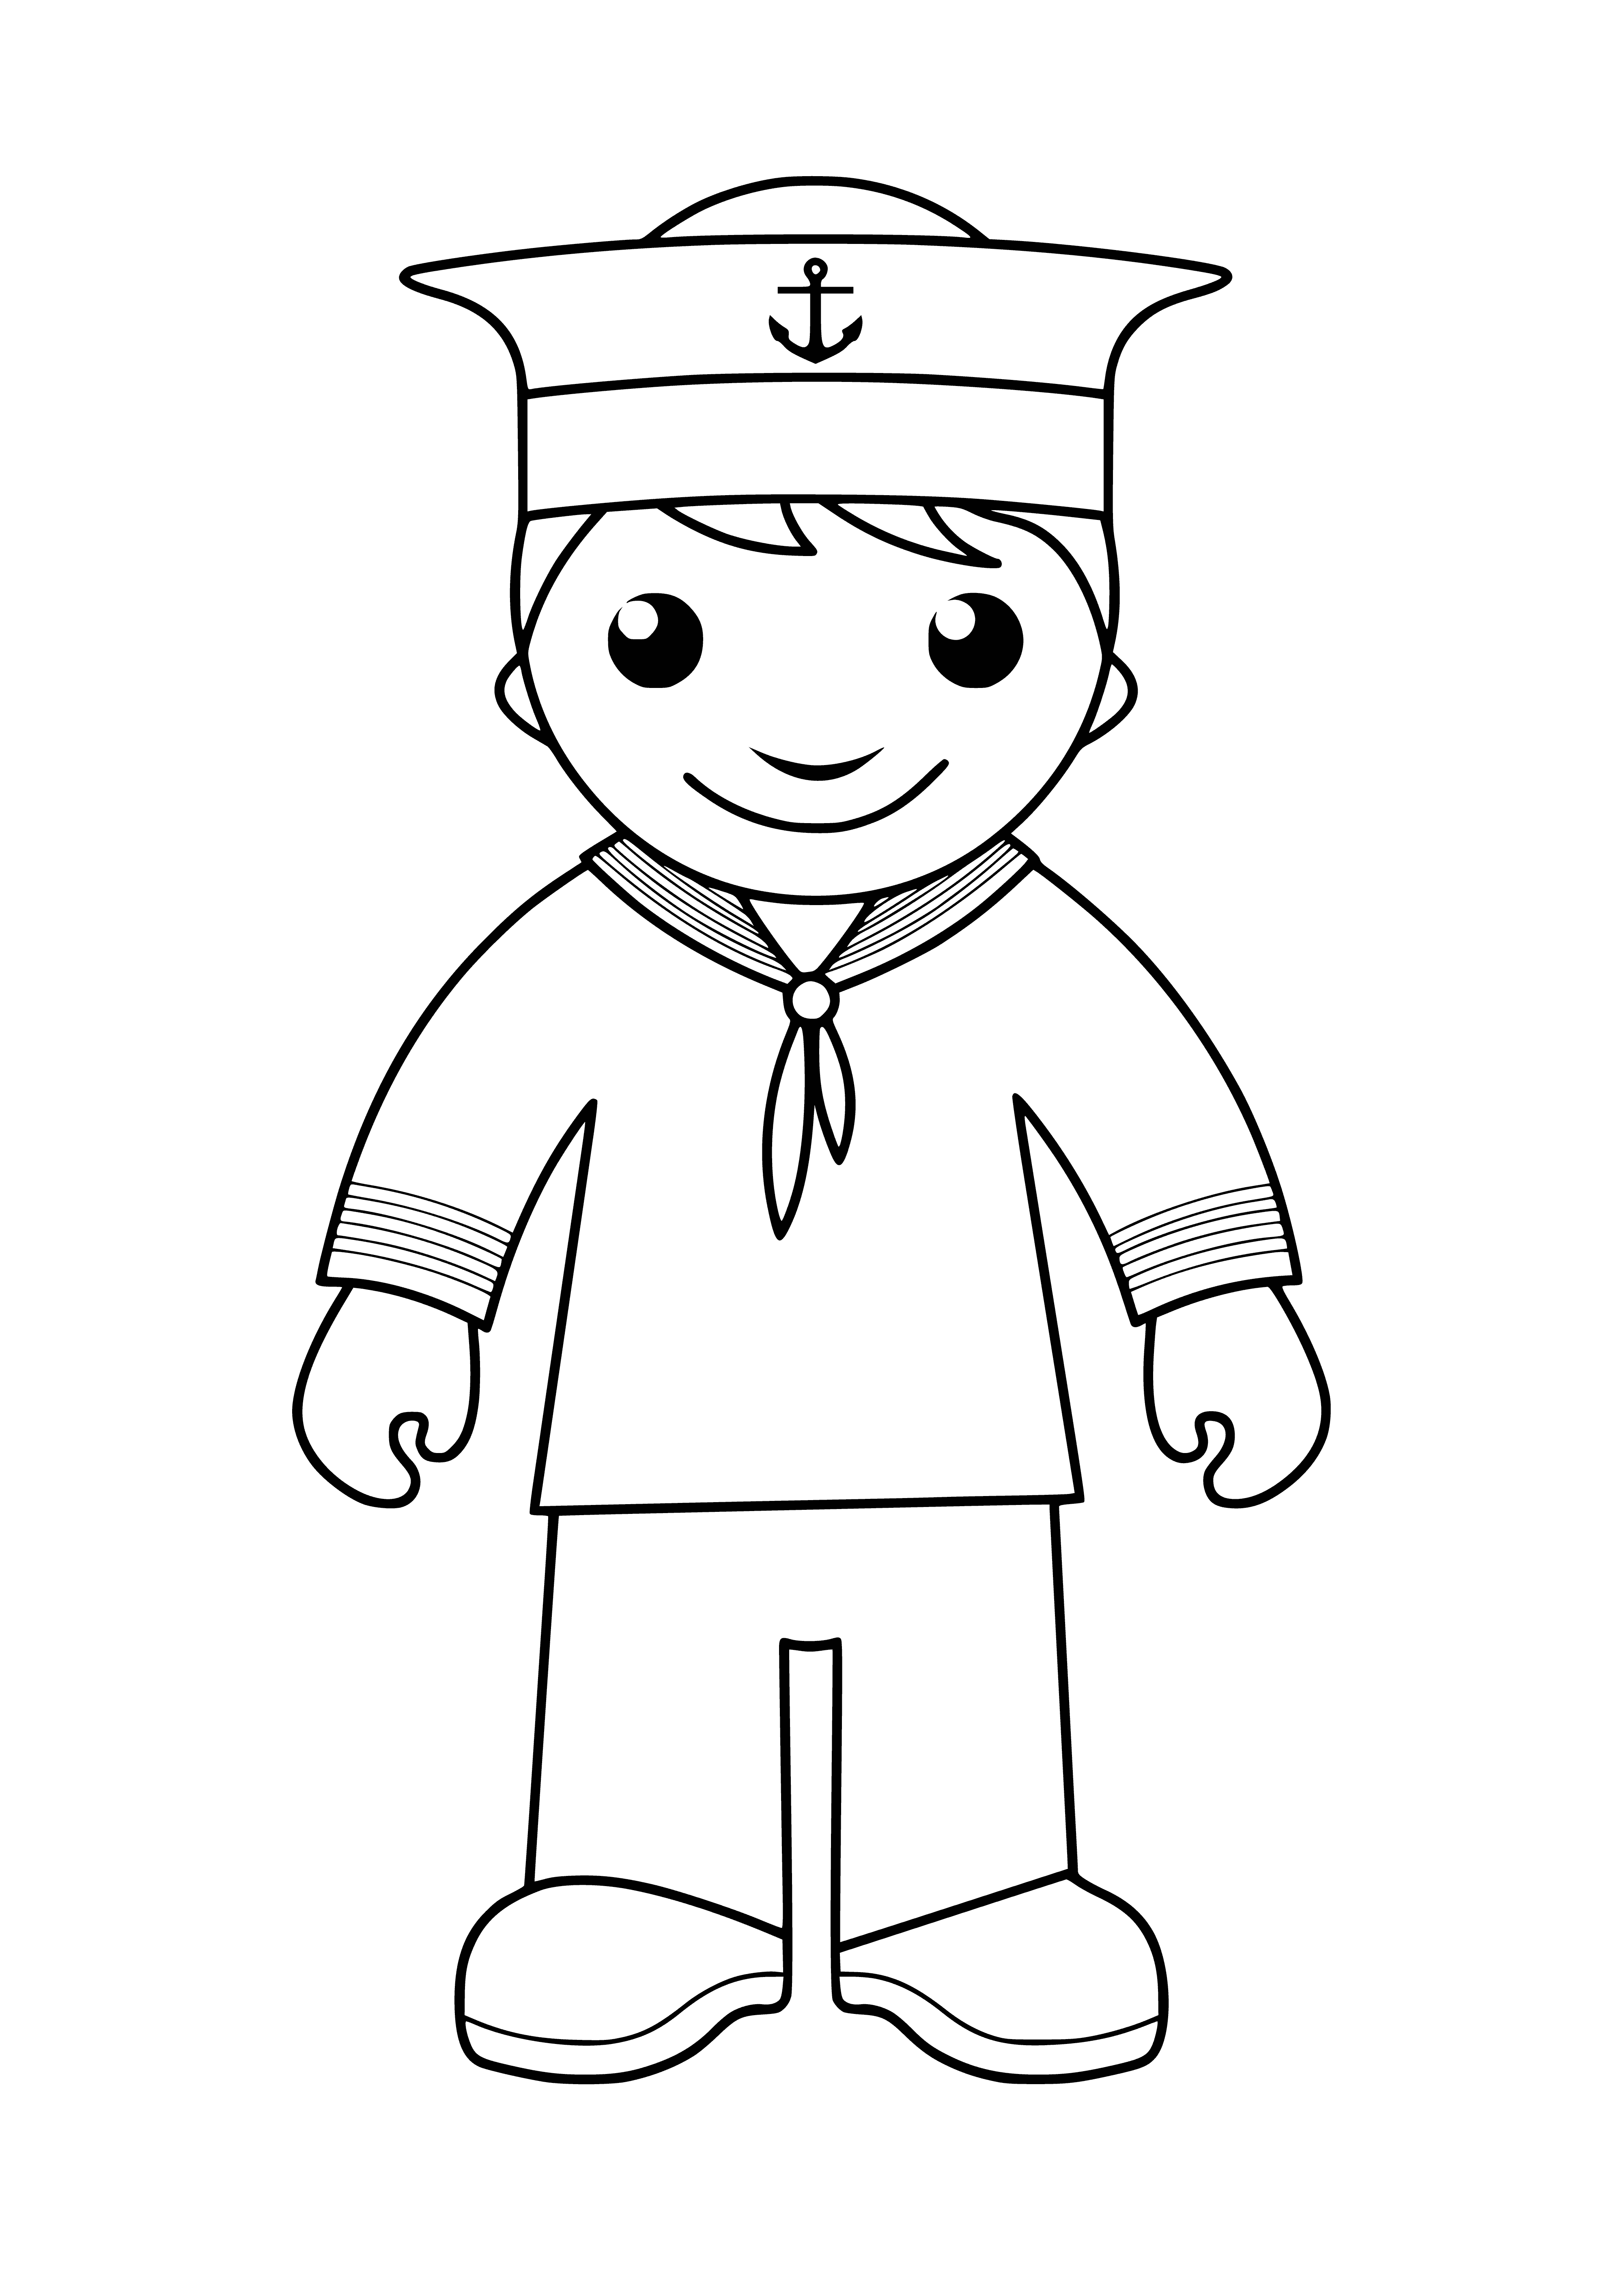 coloring page: A sailor stands on the deck of a ship, looking straight ahead, wearing a navy blue uniform, a white sailor hat & holding a rope.